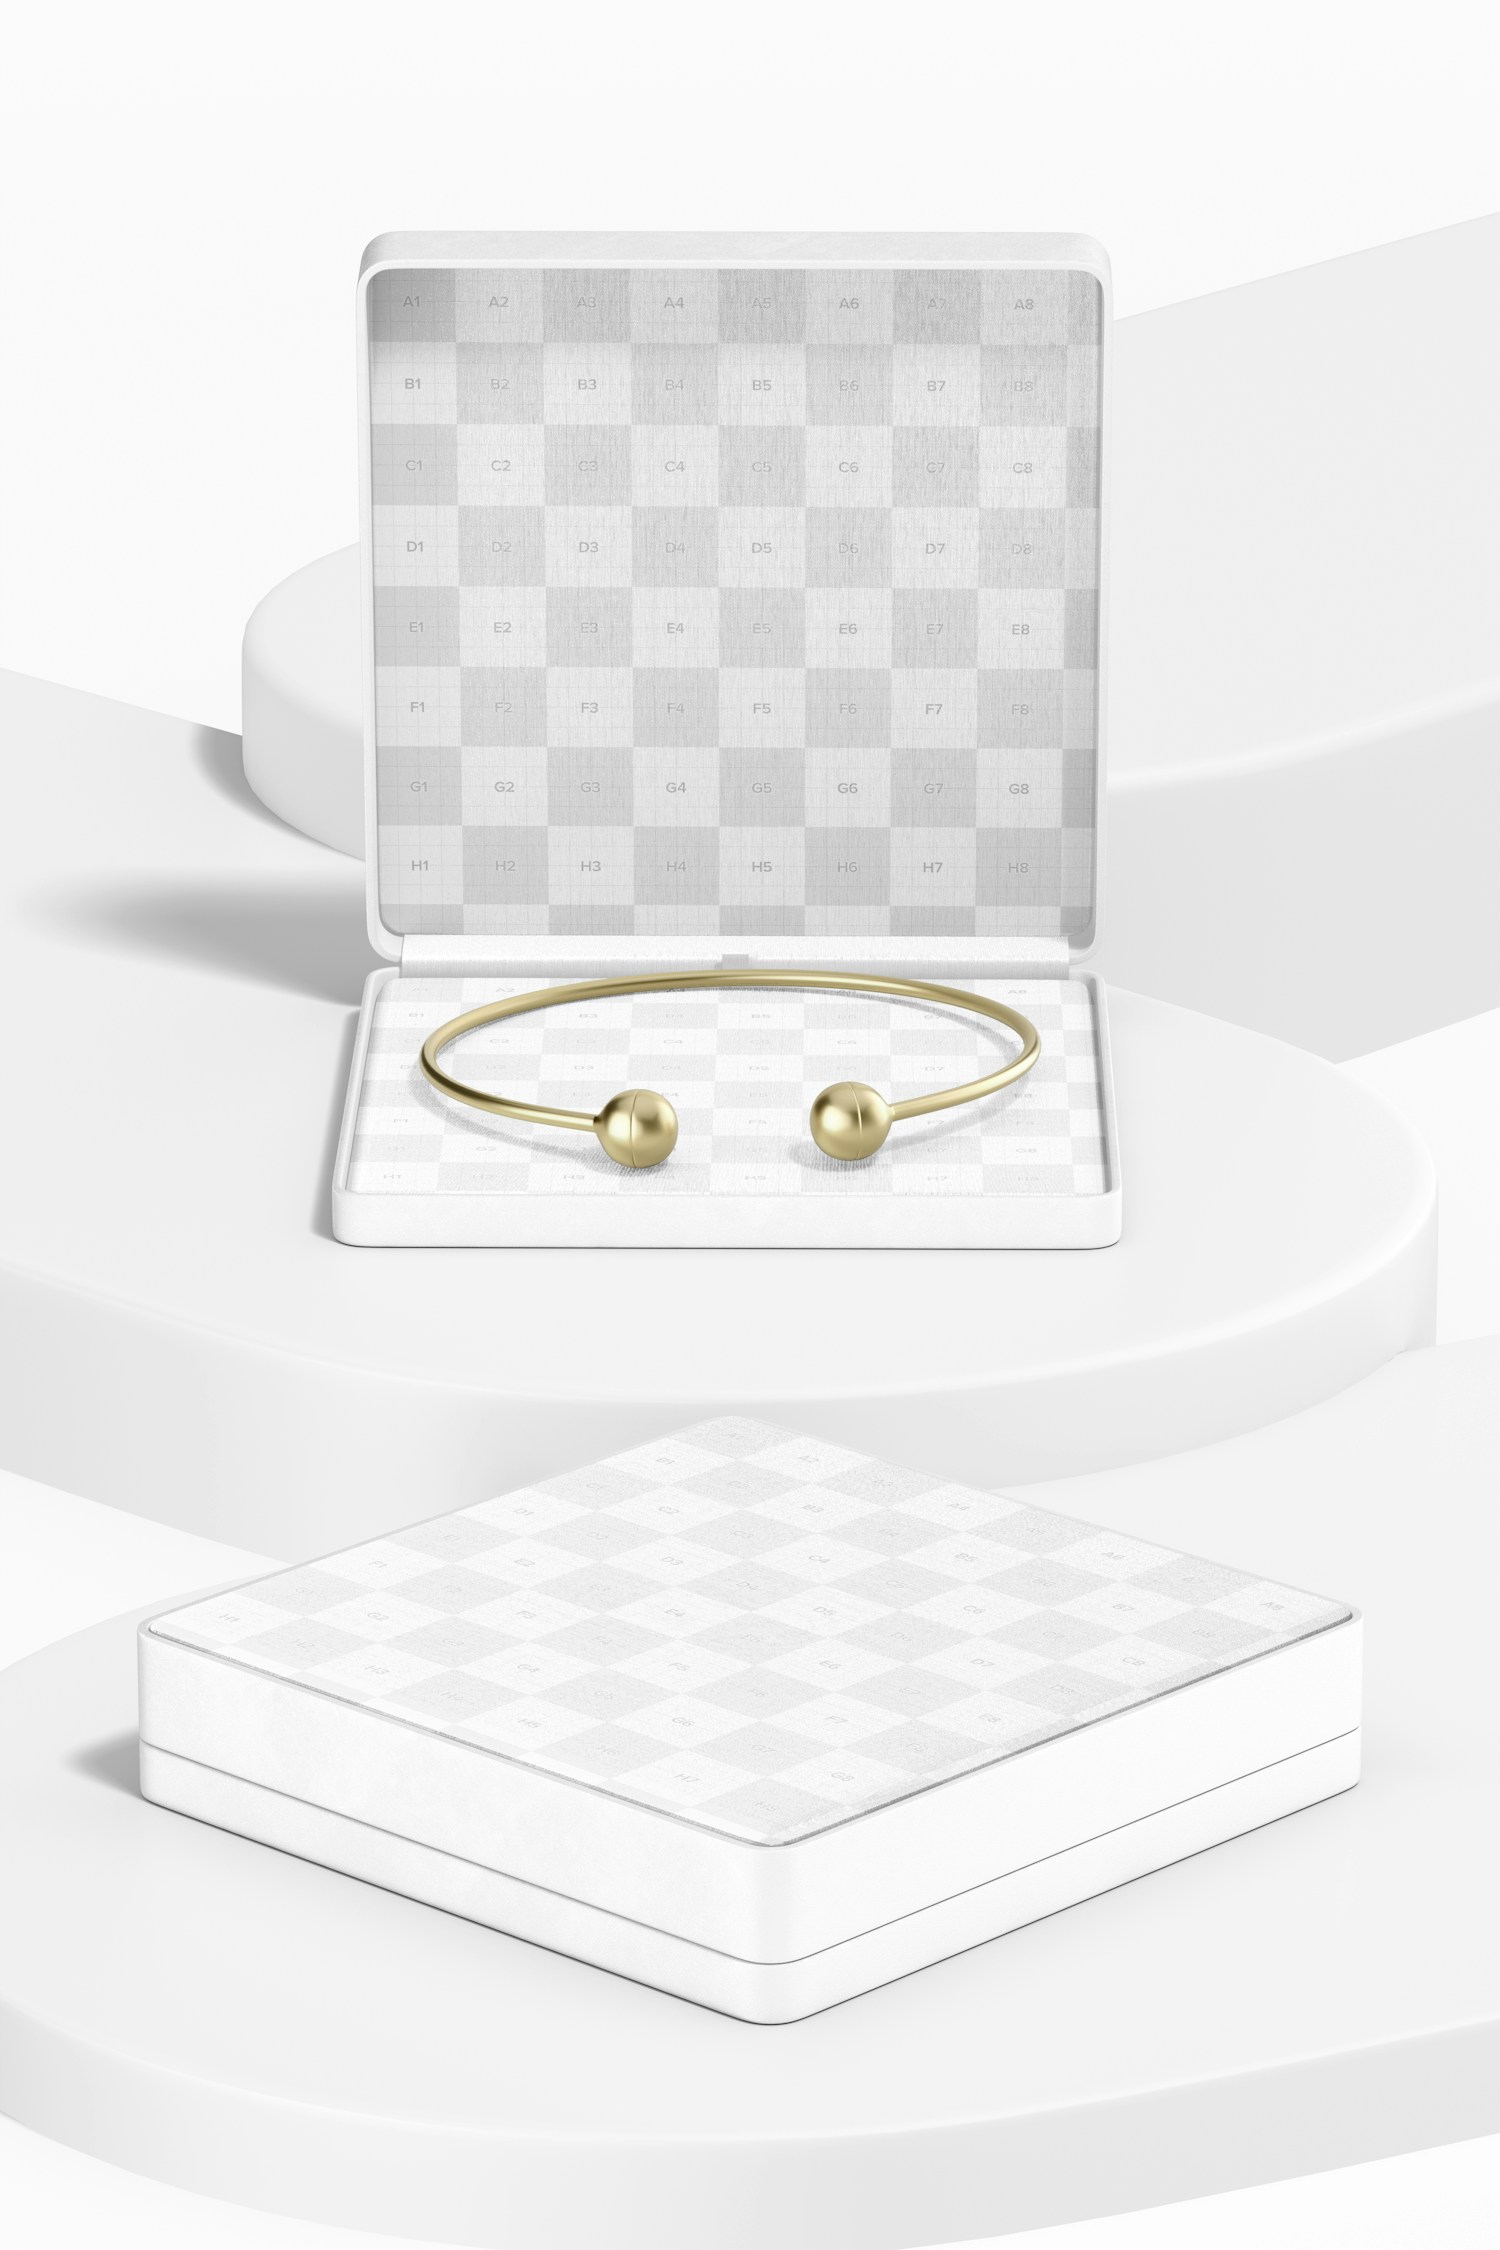 Luxury Jewelry Boxes Mockup, Opened and Closed